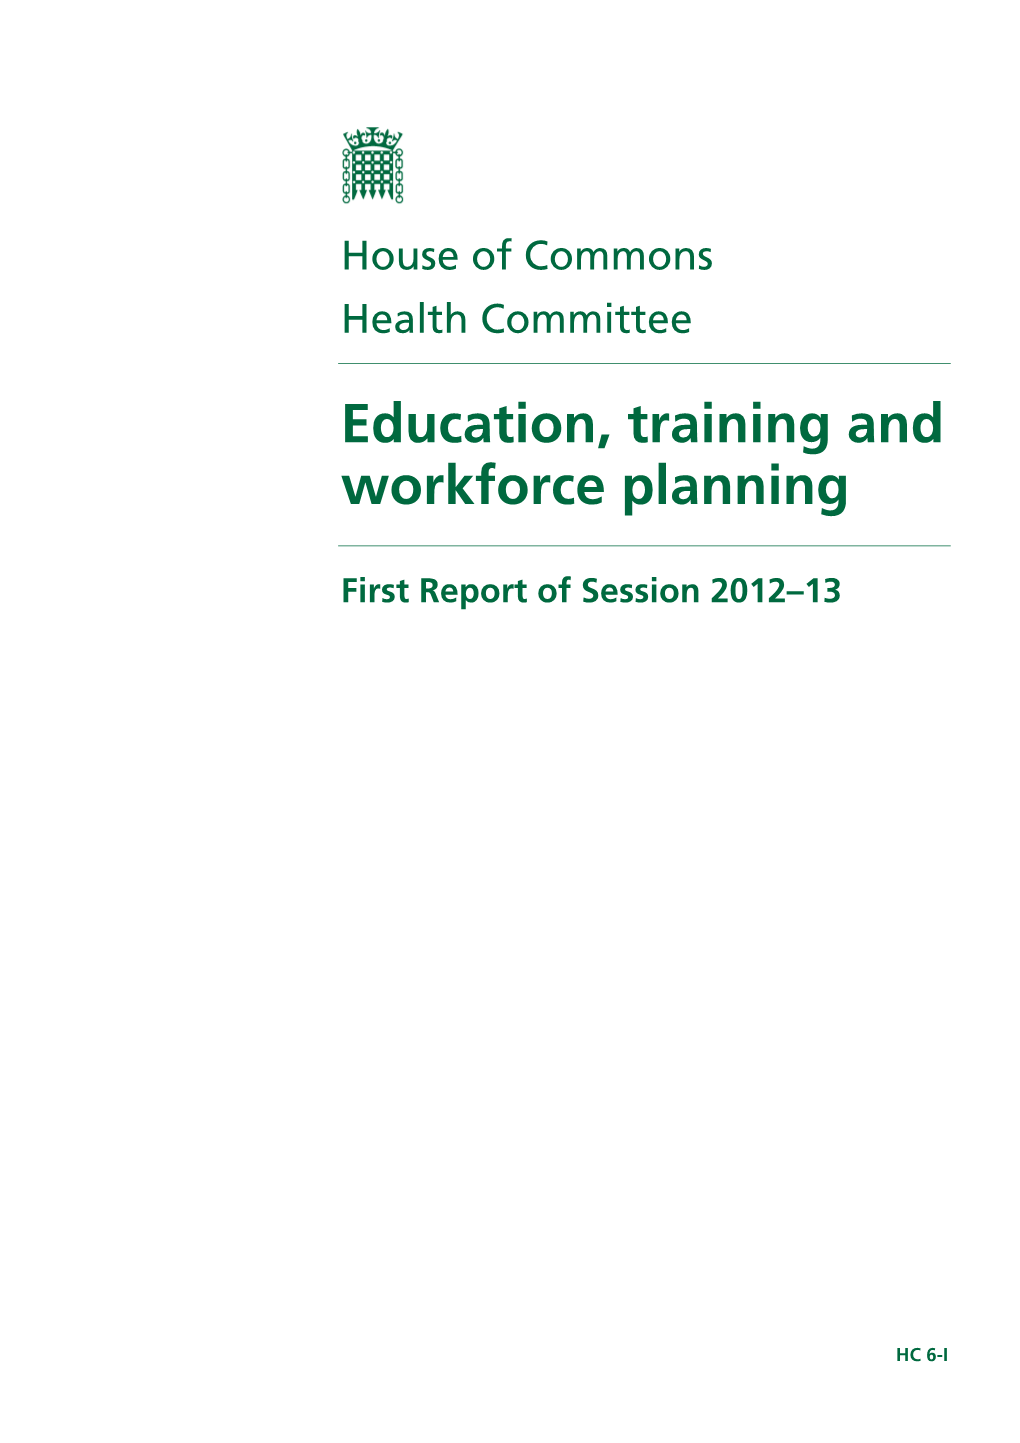 Education, Training and Workforce Planning